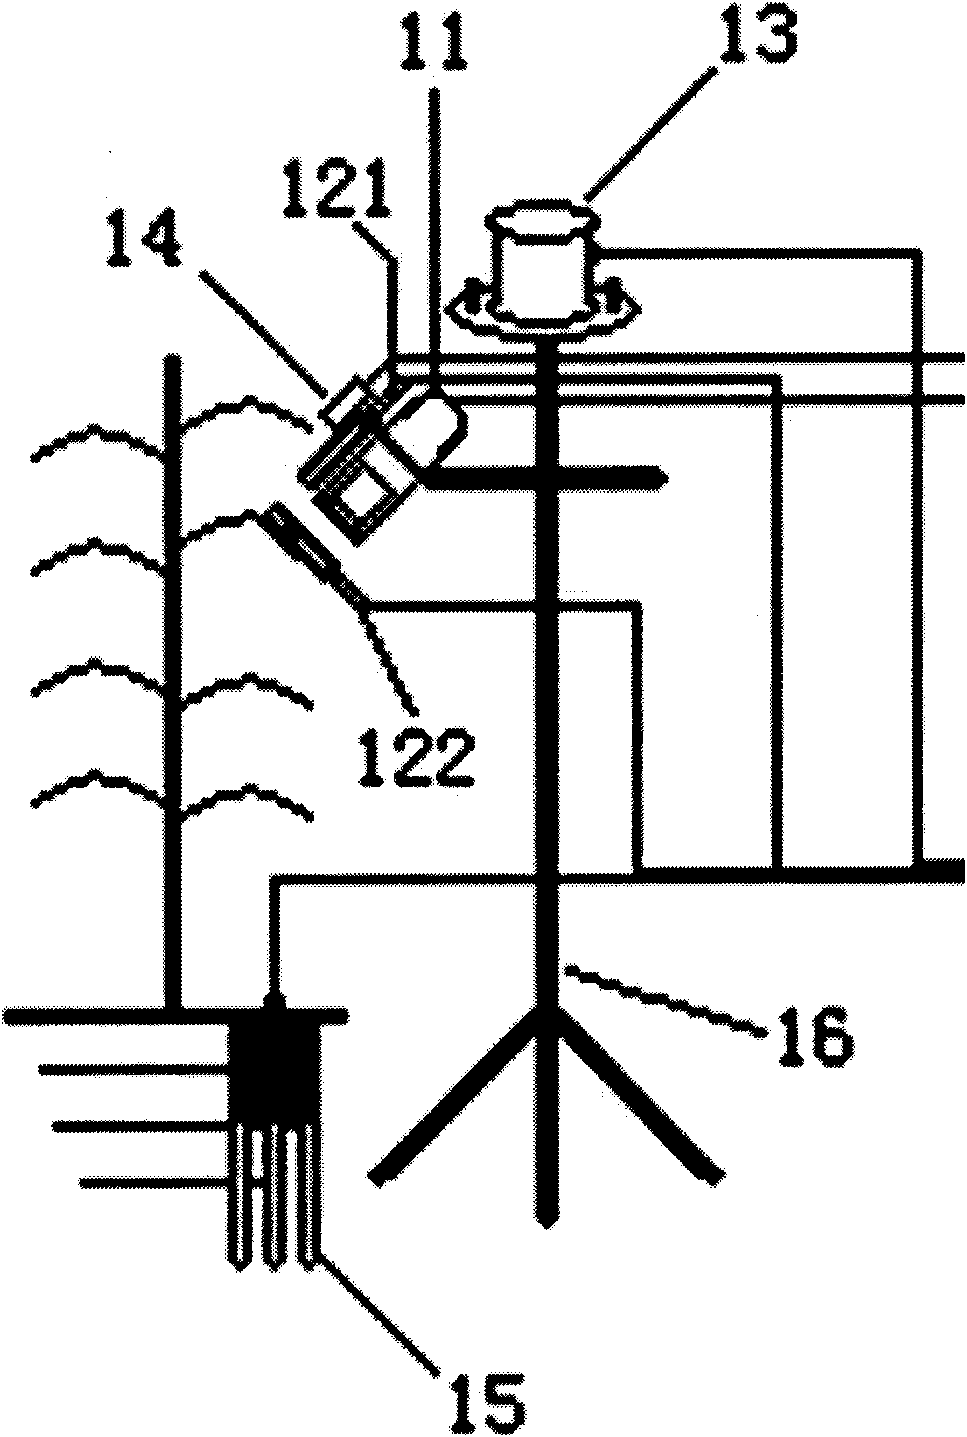 Crop moisture detection device and method based on sensors